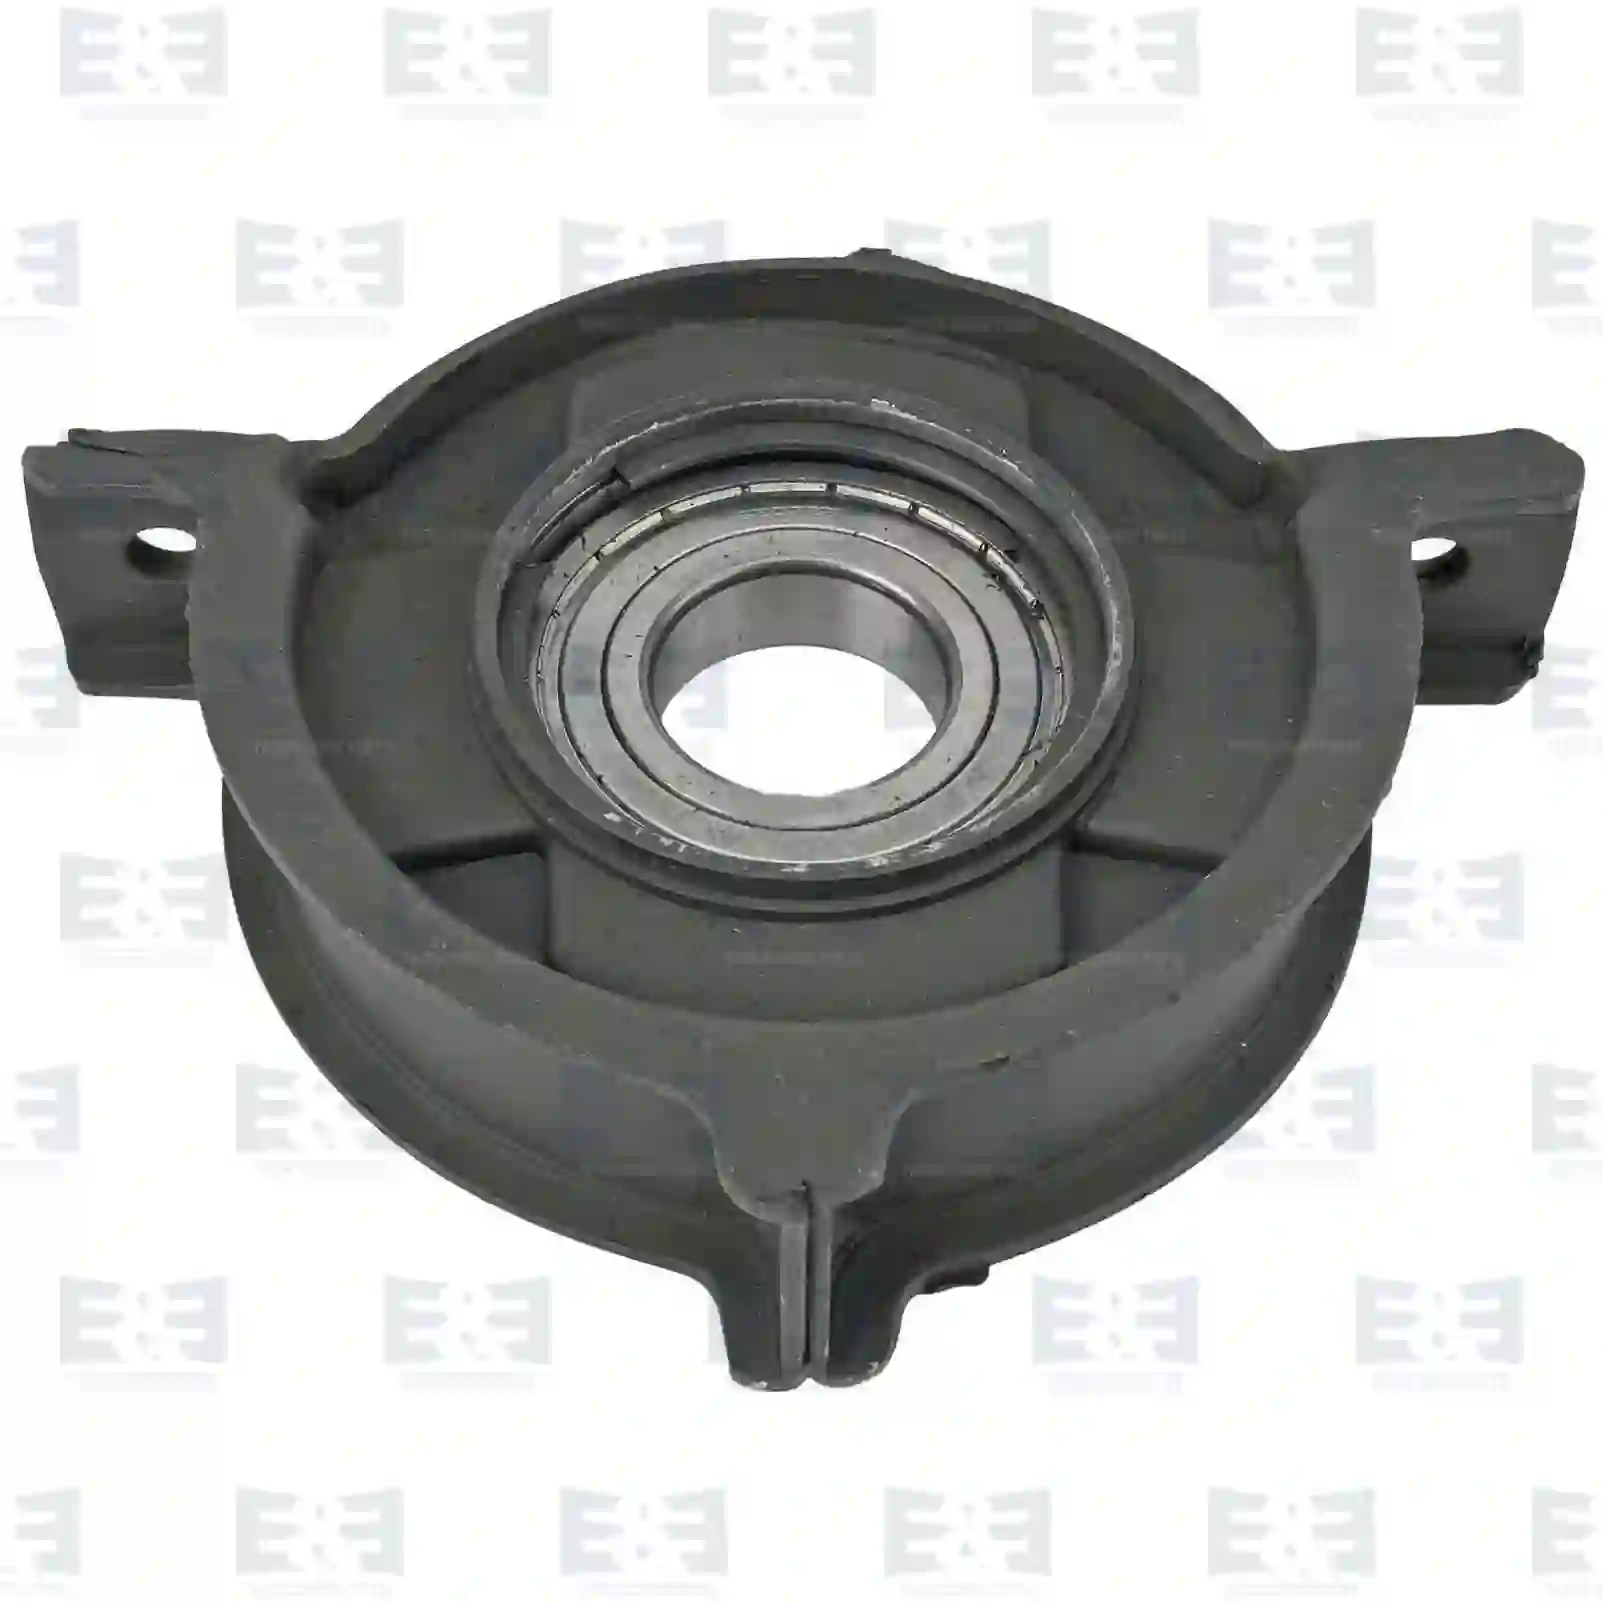 Support Bearing Center bearing, EE No 2E2276852 ,  oem no:3094100110, 3095860141, 3104100622, 3104100822, 3104100922 E&E Truck Spare Parts | Truck Spare Parts, Auotomotive Spare Parts